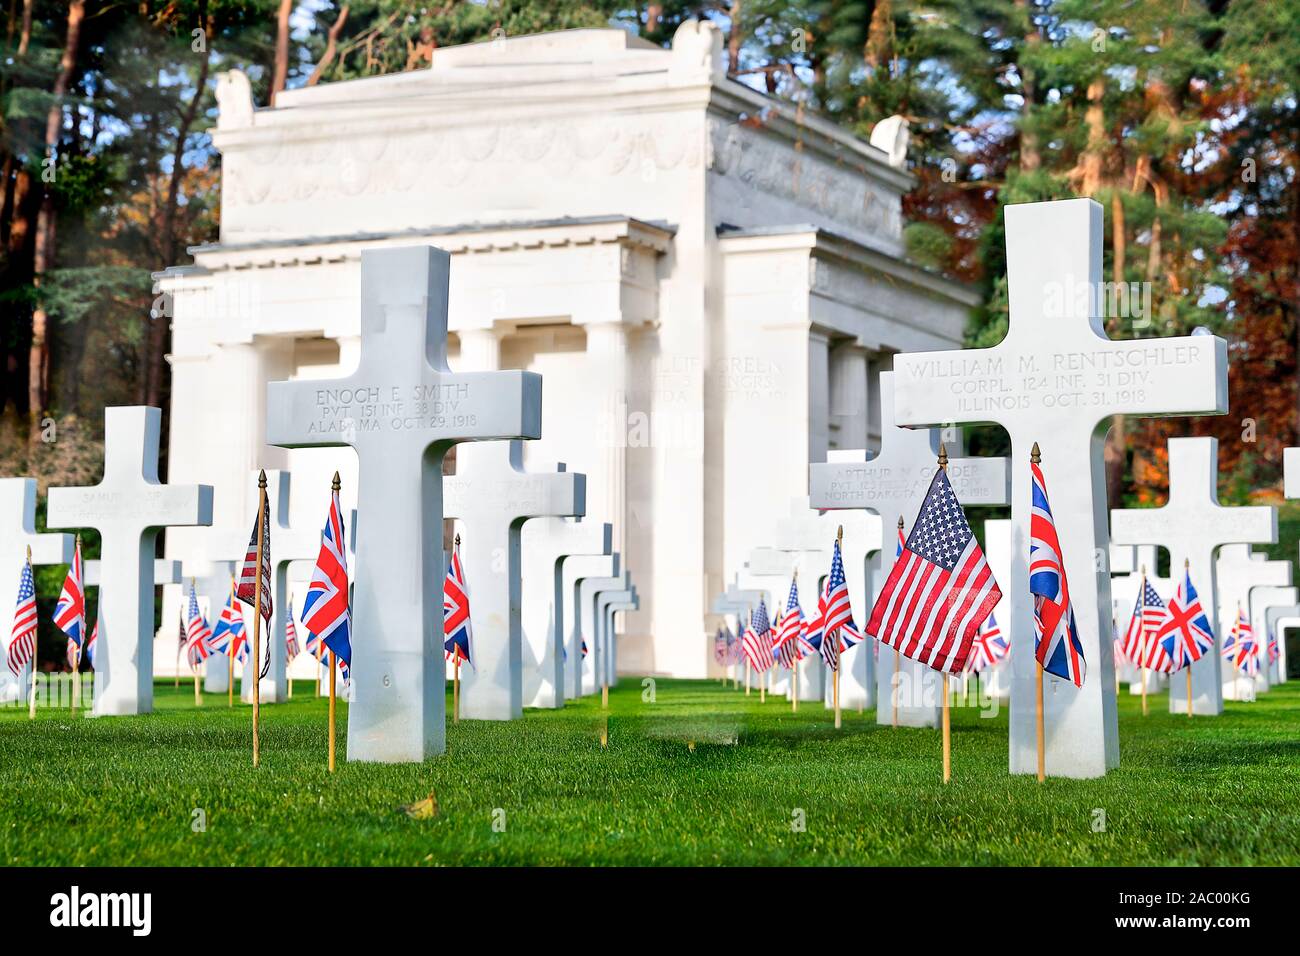 American Military Cemetery Brookwood UK for Remembrance Sunday 2019 with national flags at headstones Stock Photo